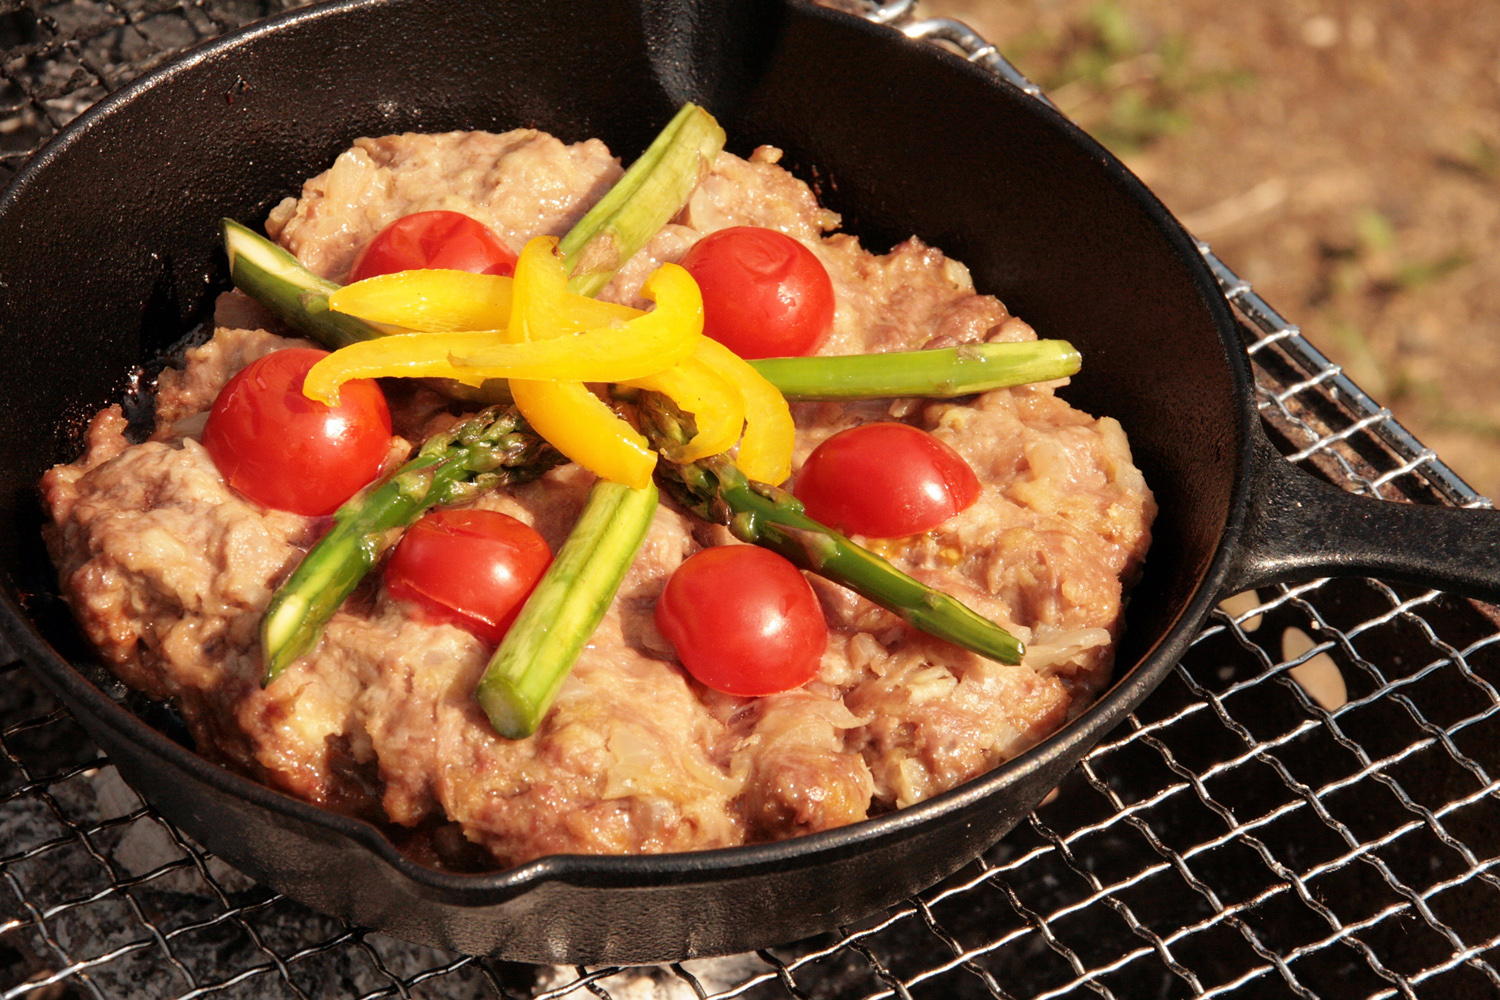 Try Something New. Simple Recipes in the Skillet!